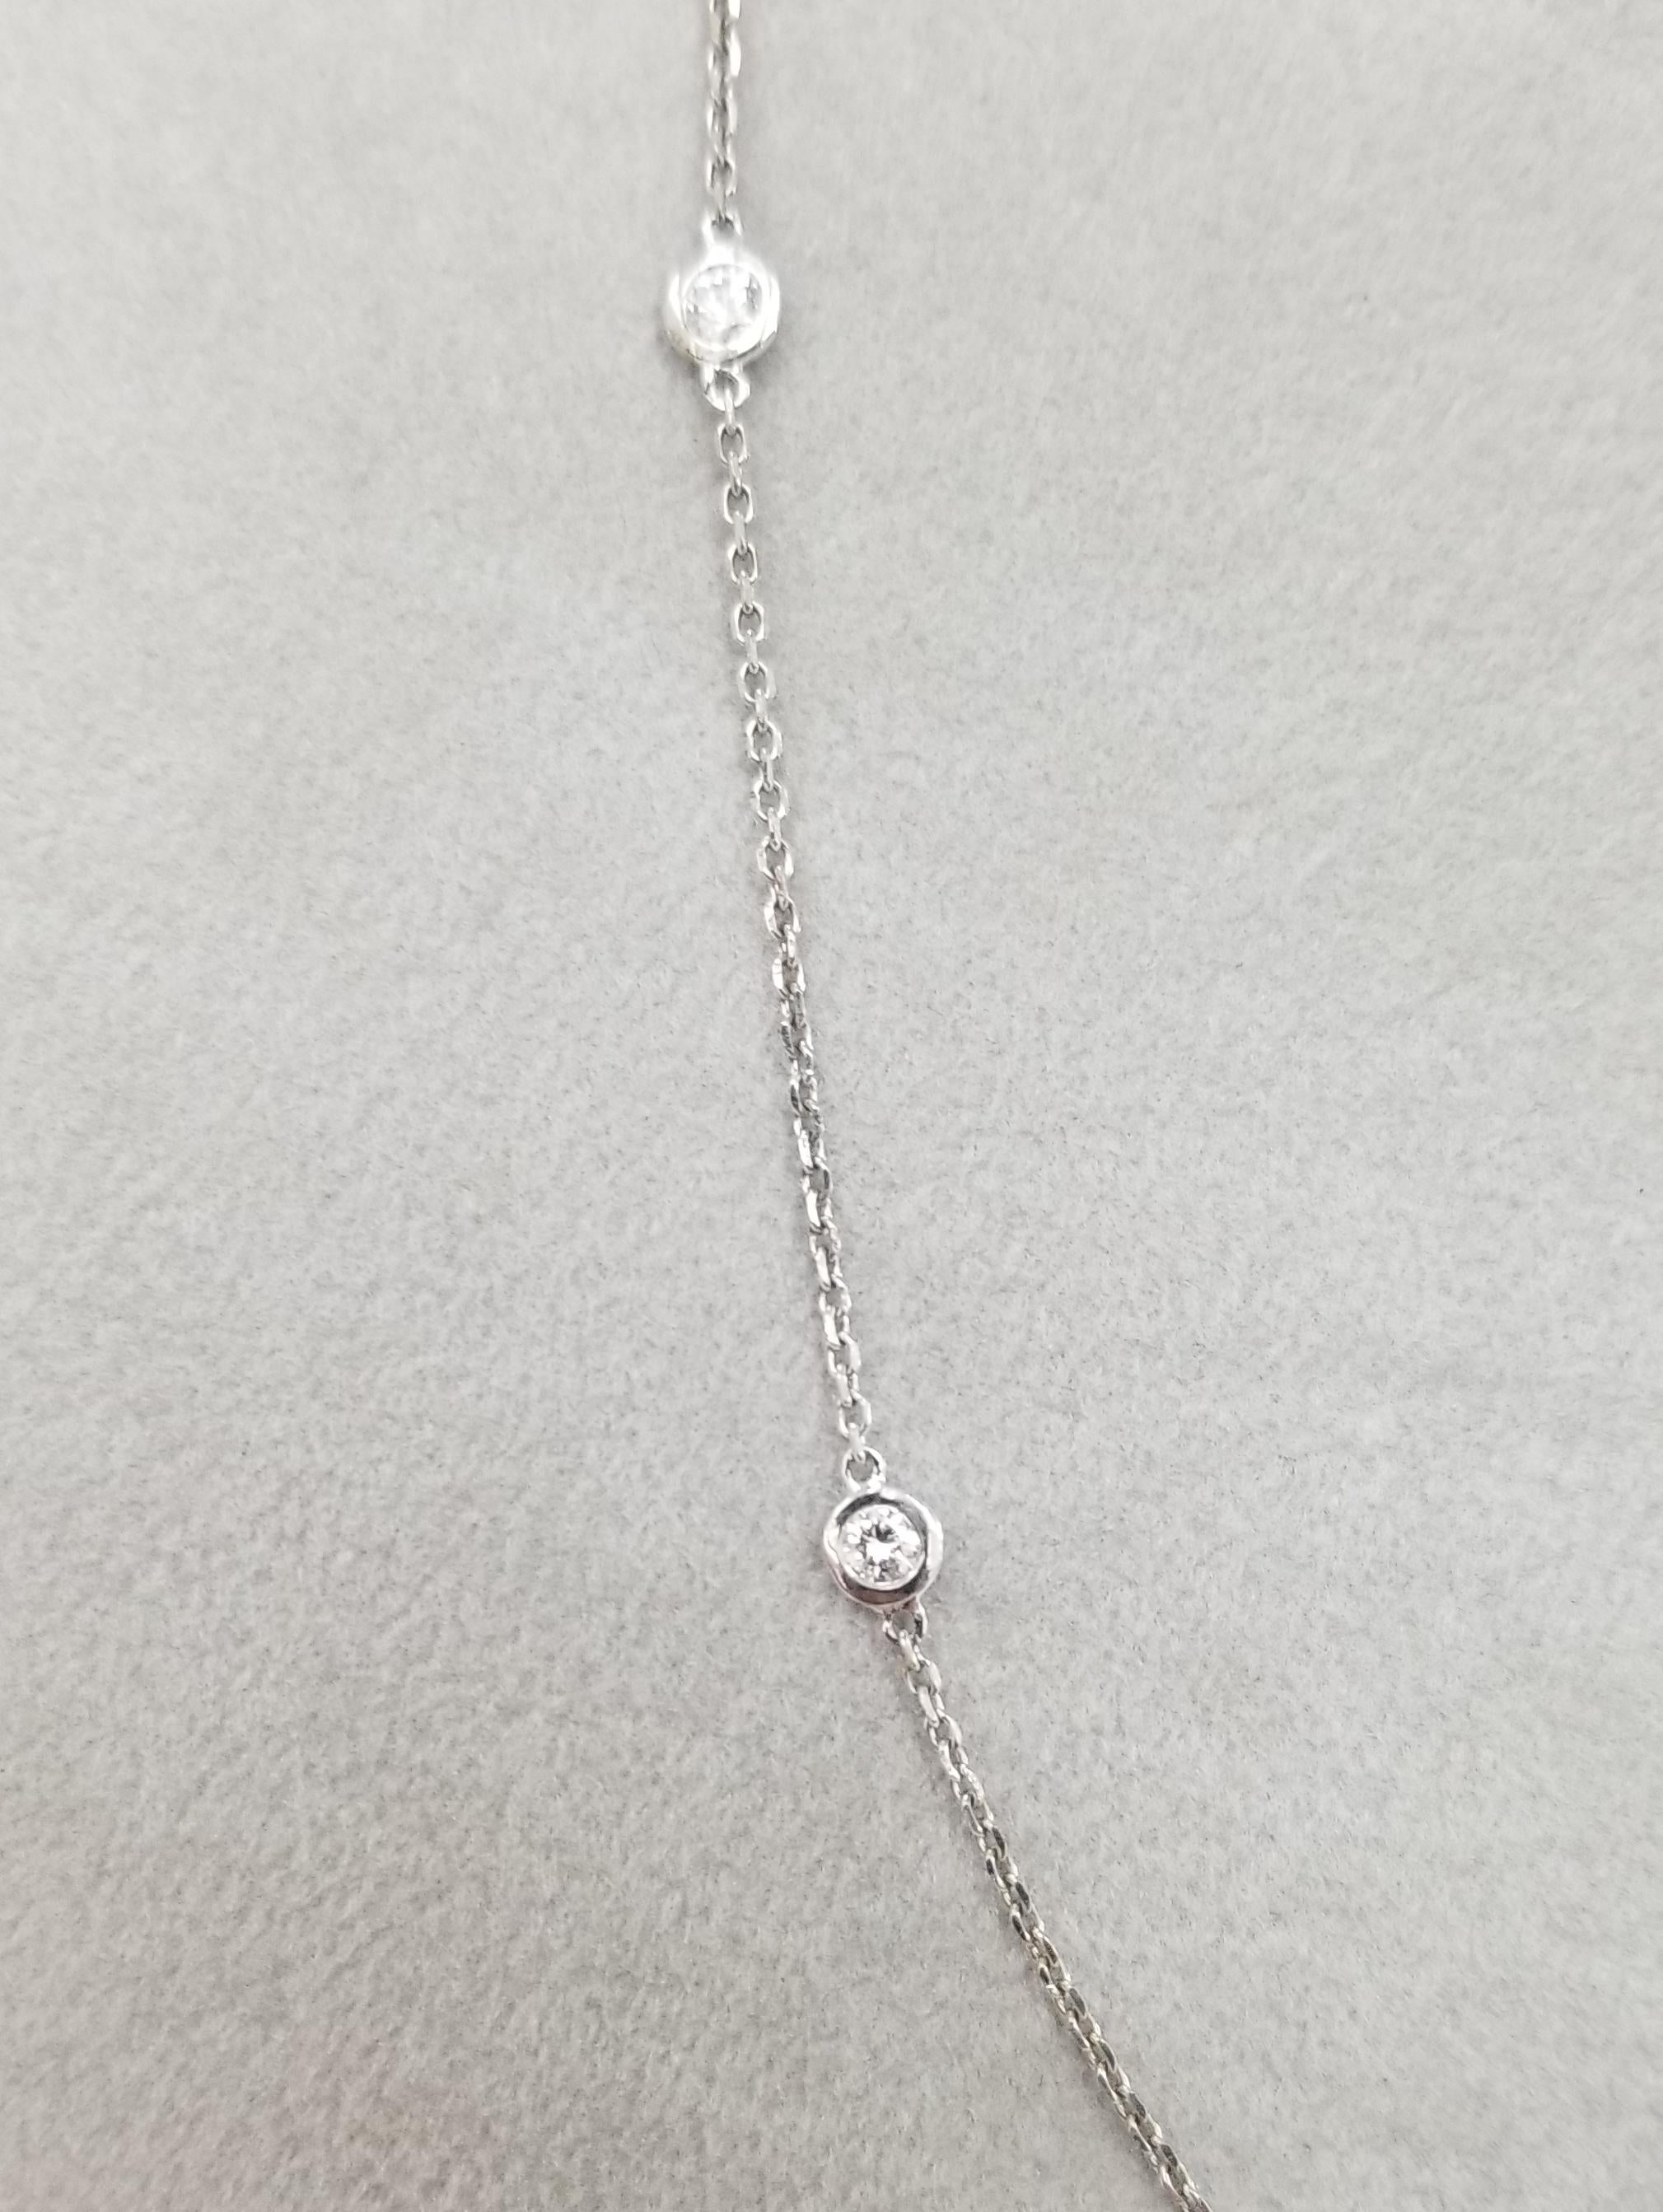 14k white gold diamonds by the yard necklace, containing 10 round full cut diamonds of very fine quality weighing .70pts. on a 18 inch chain.